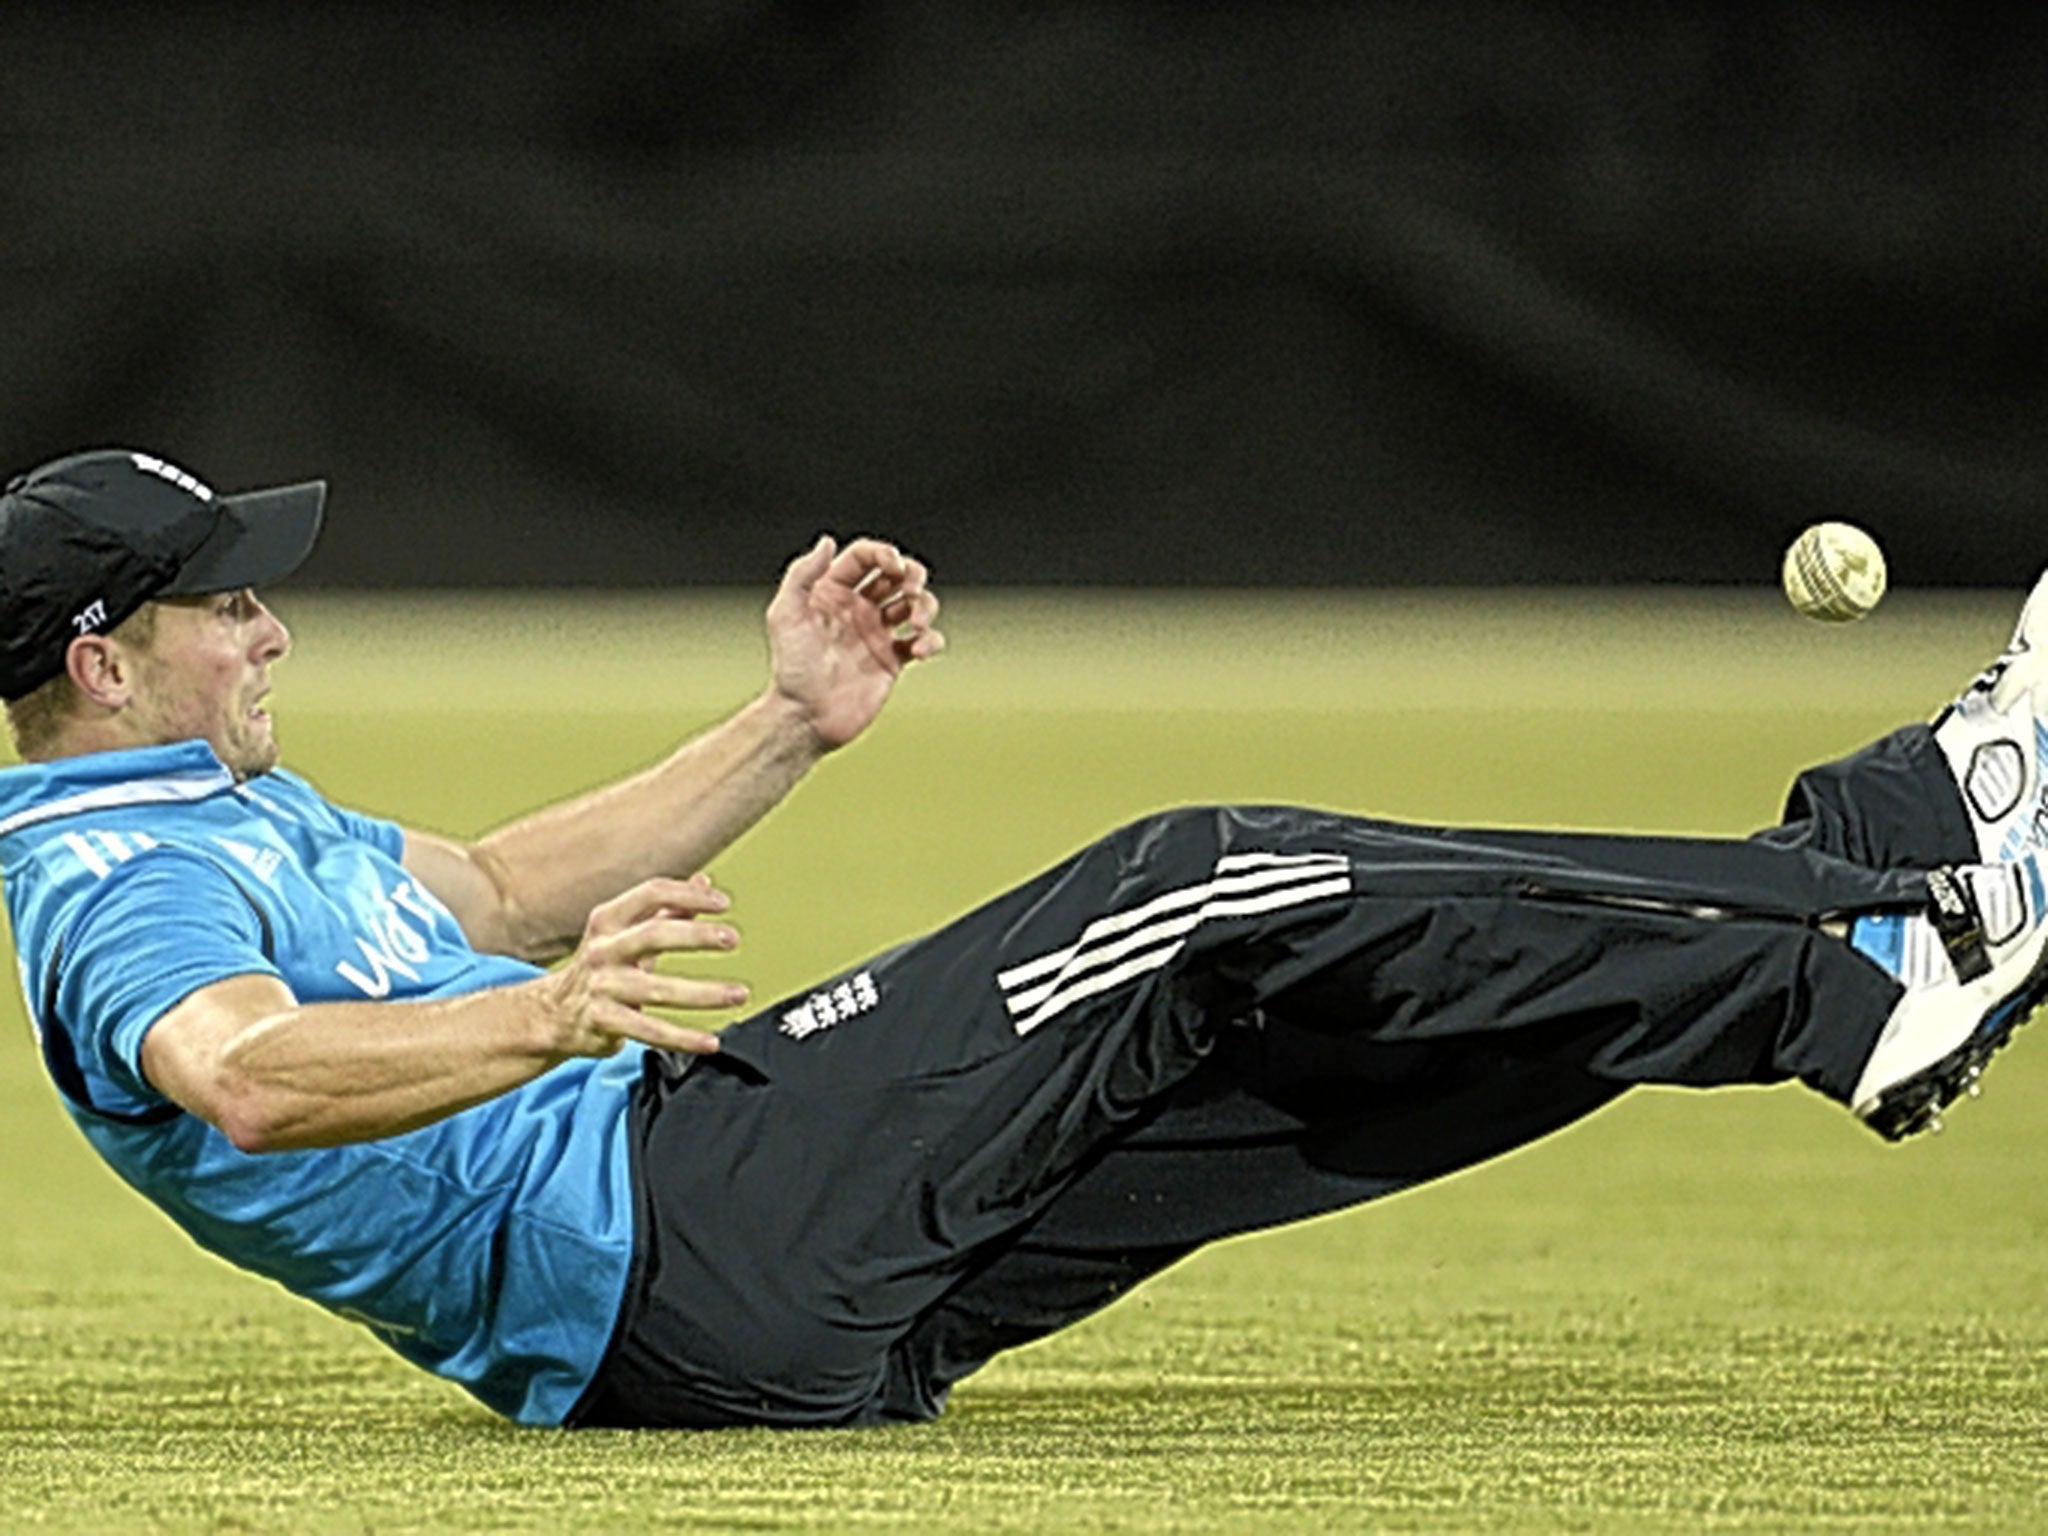 Chris Woakes keeps the ball up with his feet before his incredible catch